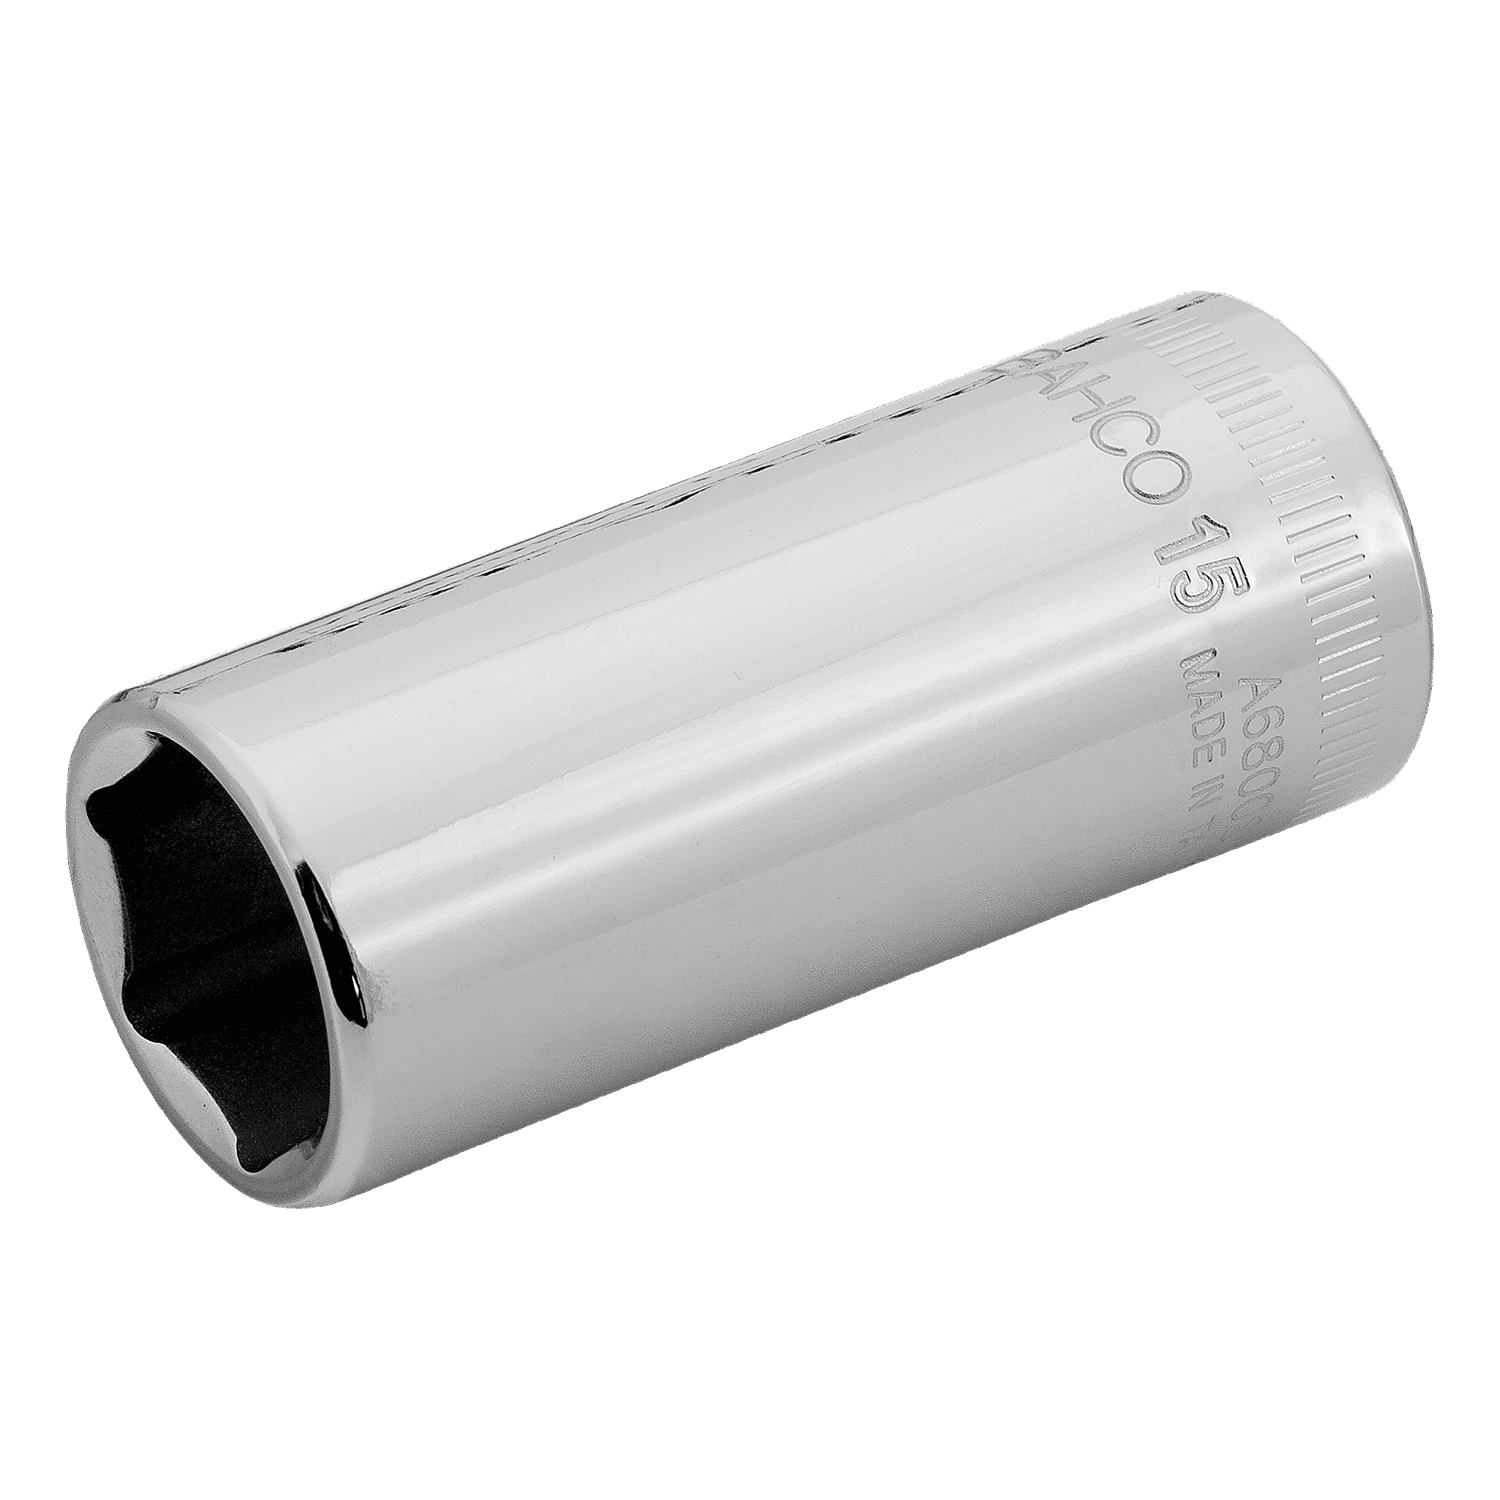 BAHCO A6800SM 1/4” Square Drive Deep Socket Metric Hex profile - Premium Socket from BAHCO - Shop now at Yew Aik.